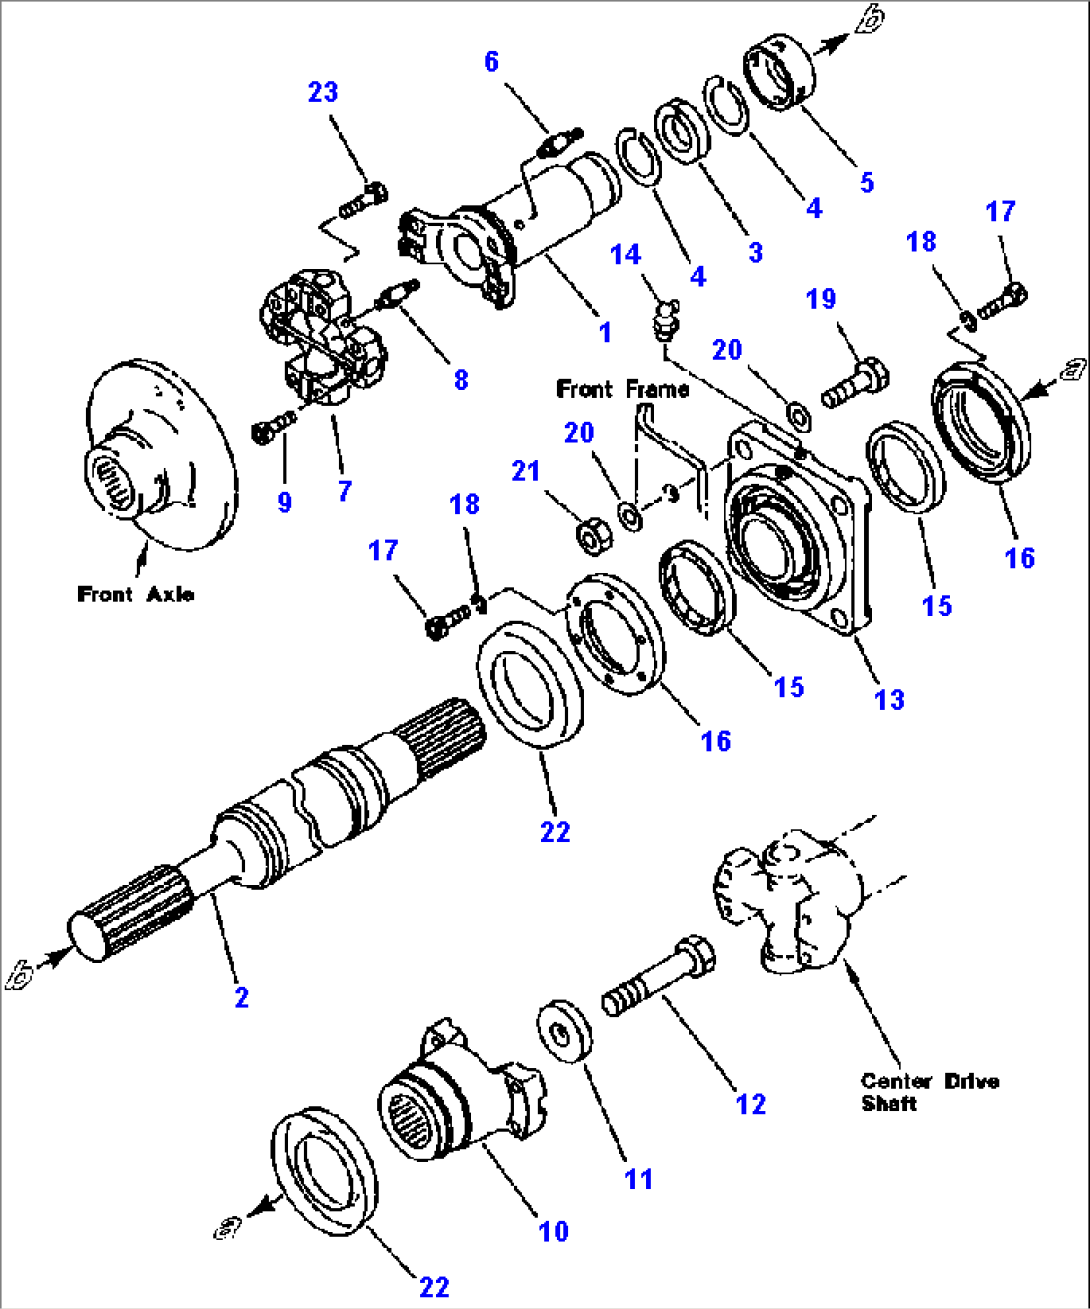 FIG NO. 3001A FRONT DRIVE SHAFT ROCKFORD